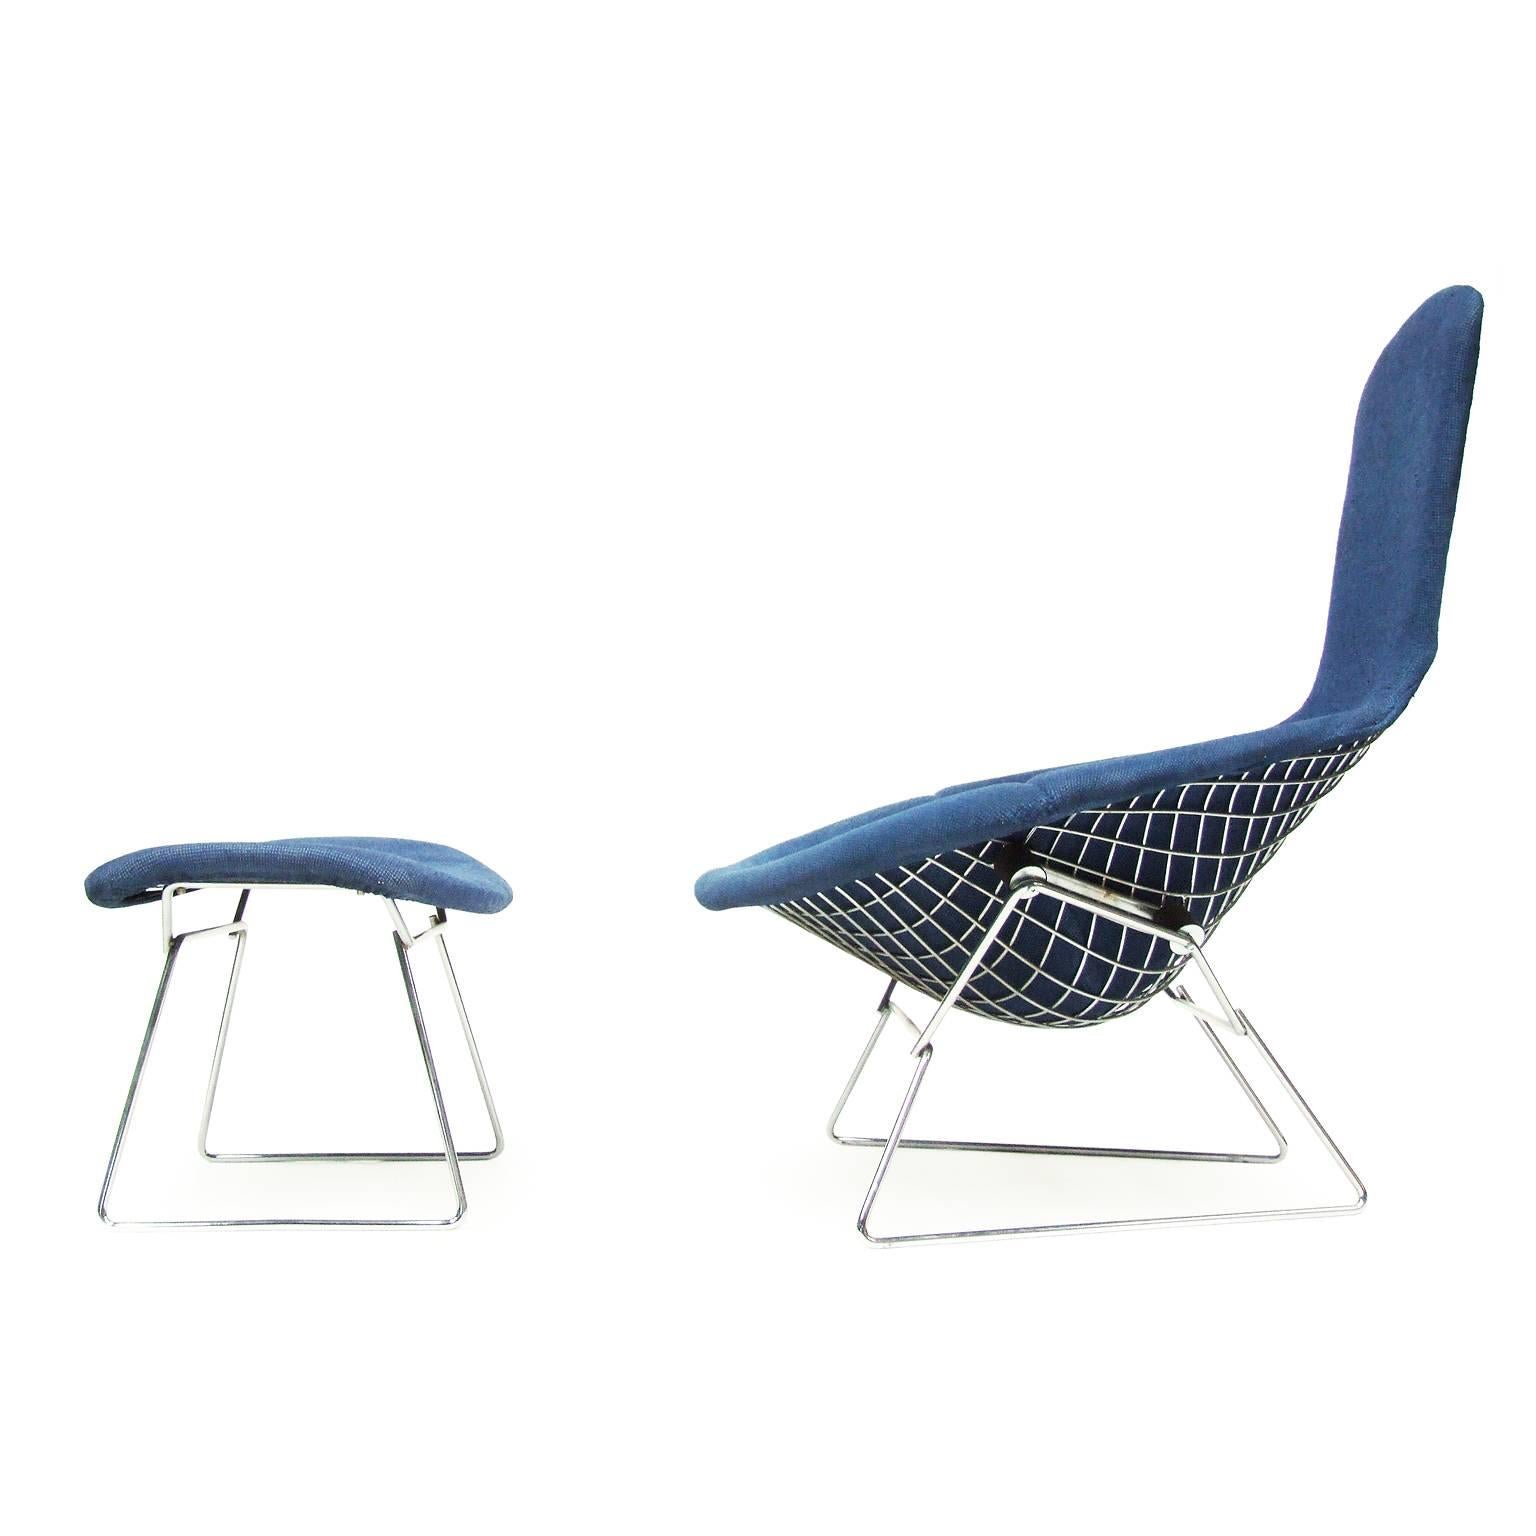 Chair and footstool designed by Harry Bertoia for Knoll, USA.

Polished chrome steel rod construction upholstered in original blue fabric.

1970s edition.

Measures: H 103cm x L 100cm x W 80cm.